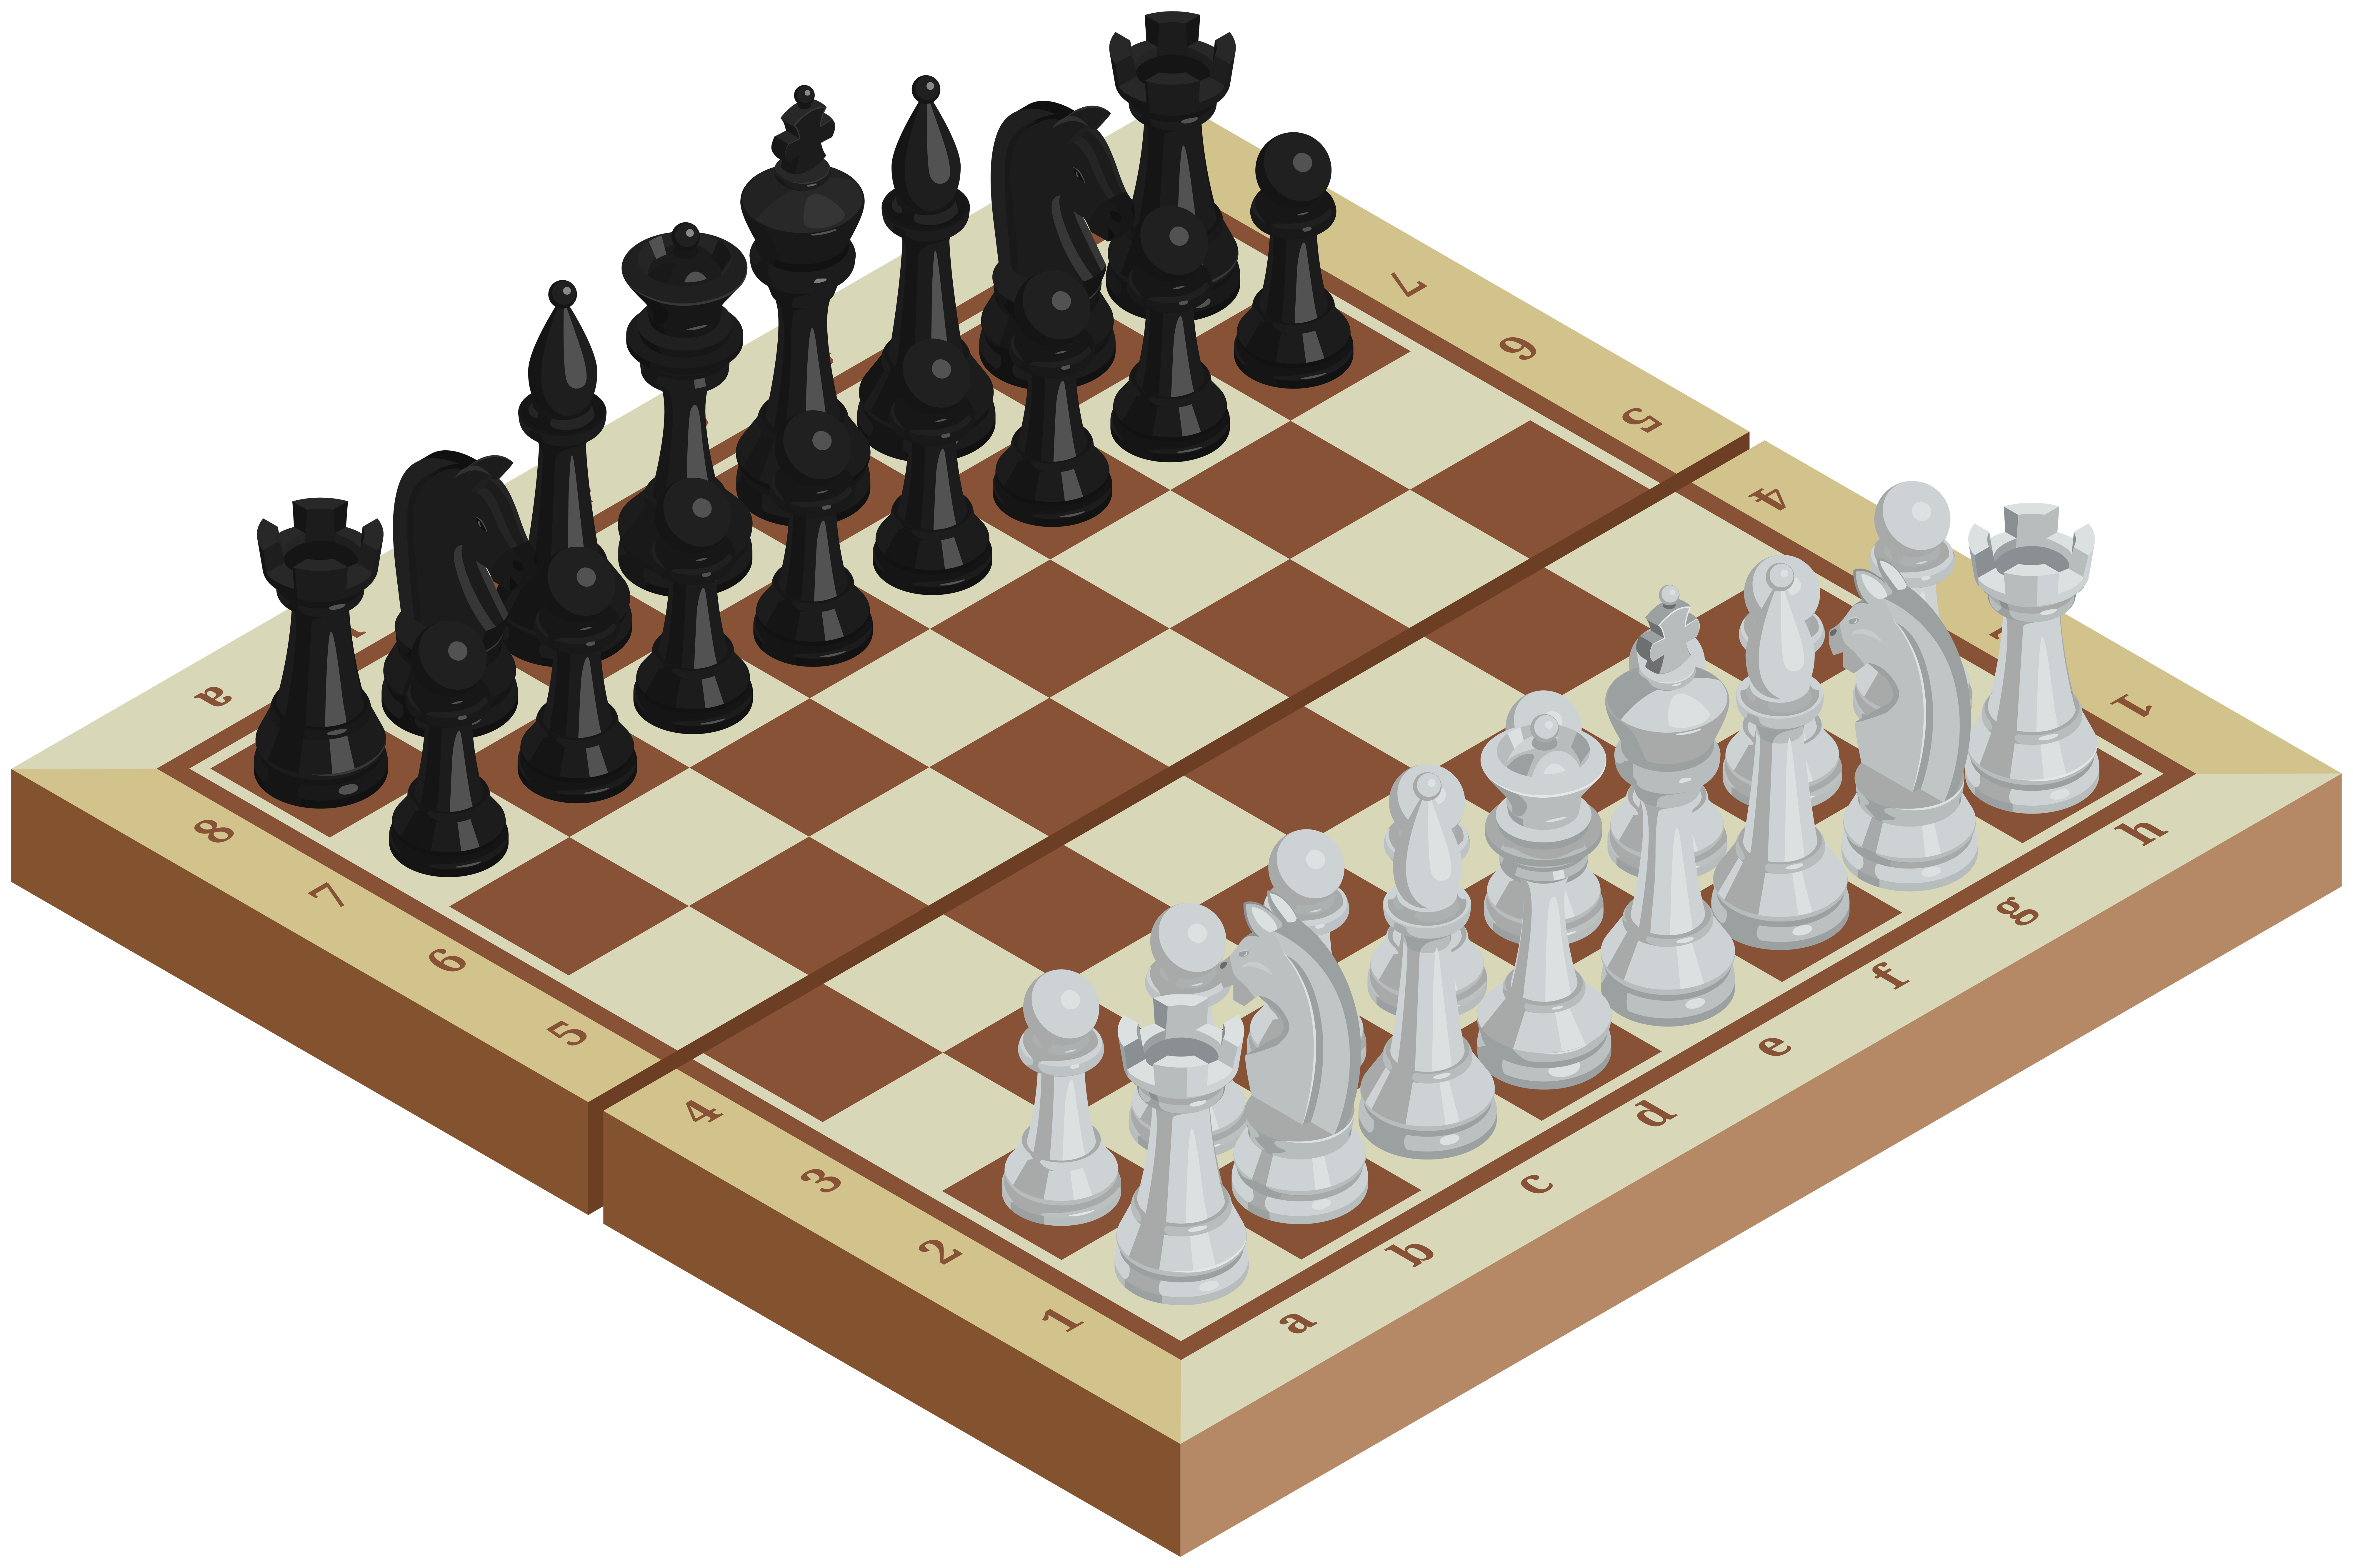 kisspng-chessboard-draughts-chess-piece-game-chessboard-png-clip-art-best-web-clipart-5cec8b60e65ee8.3271427915590060489436